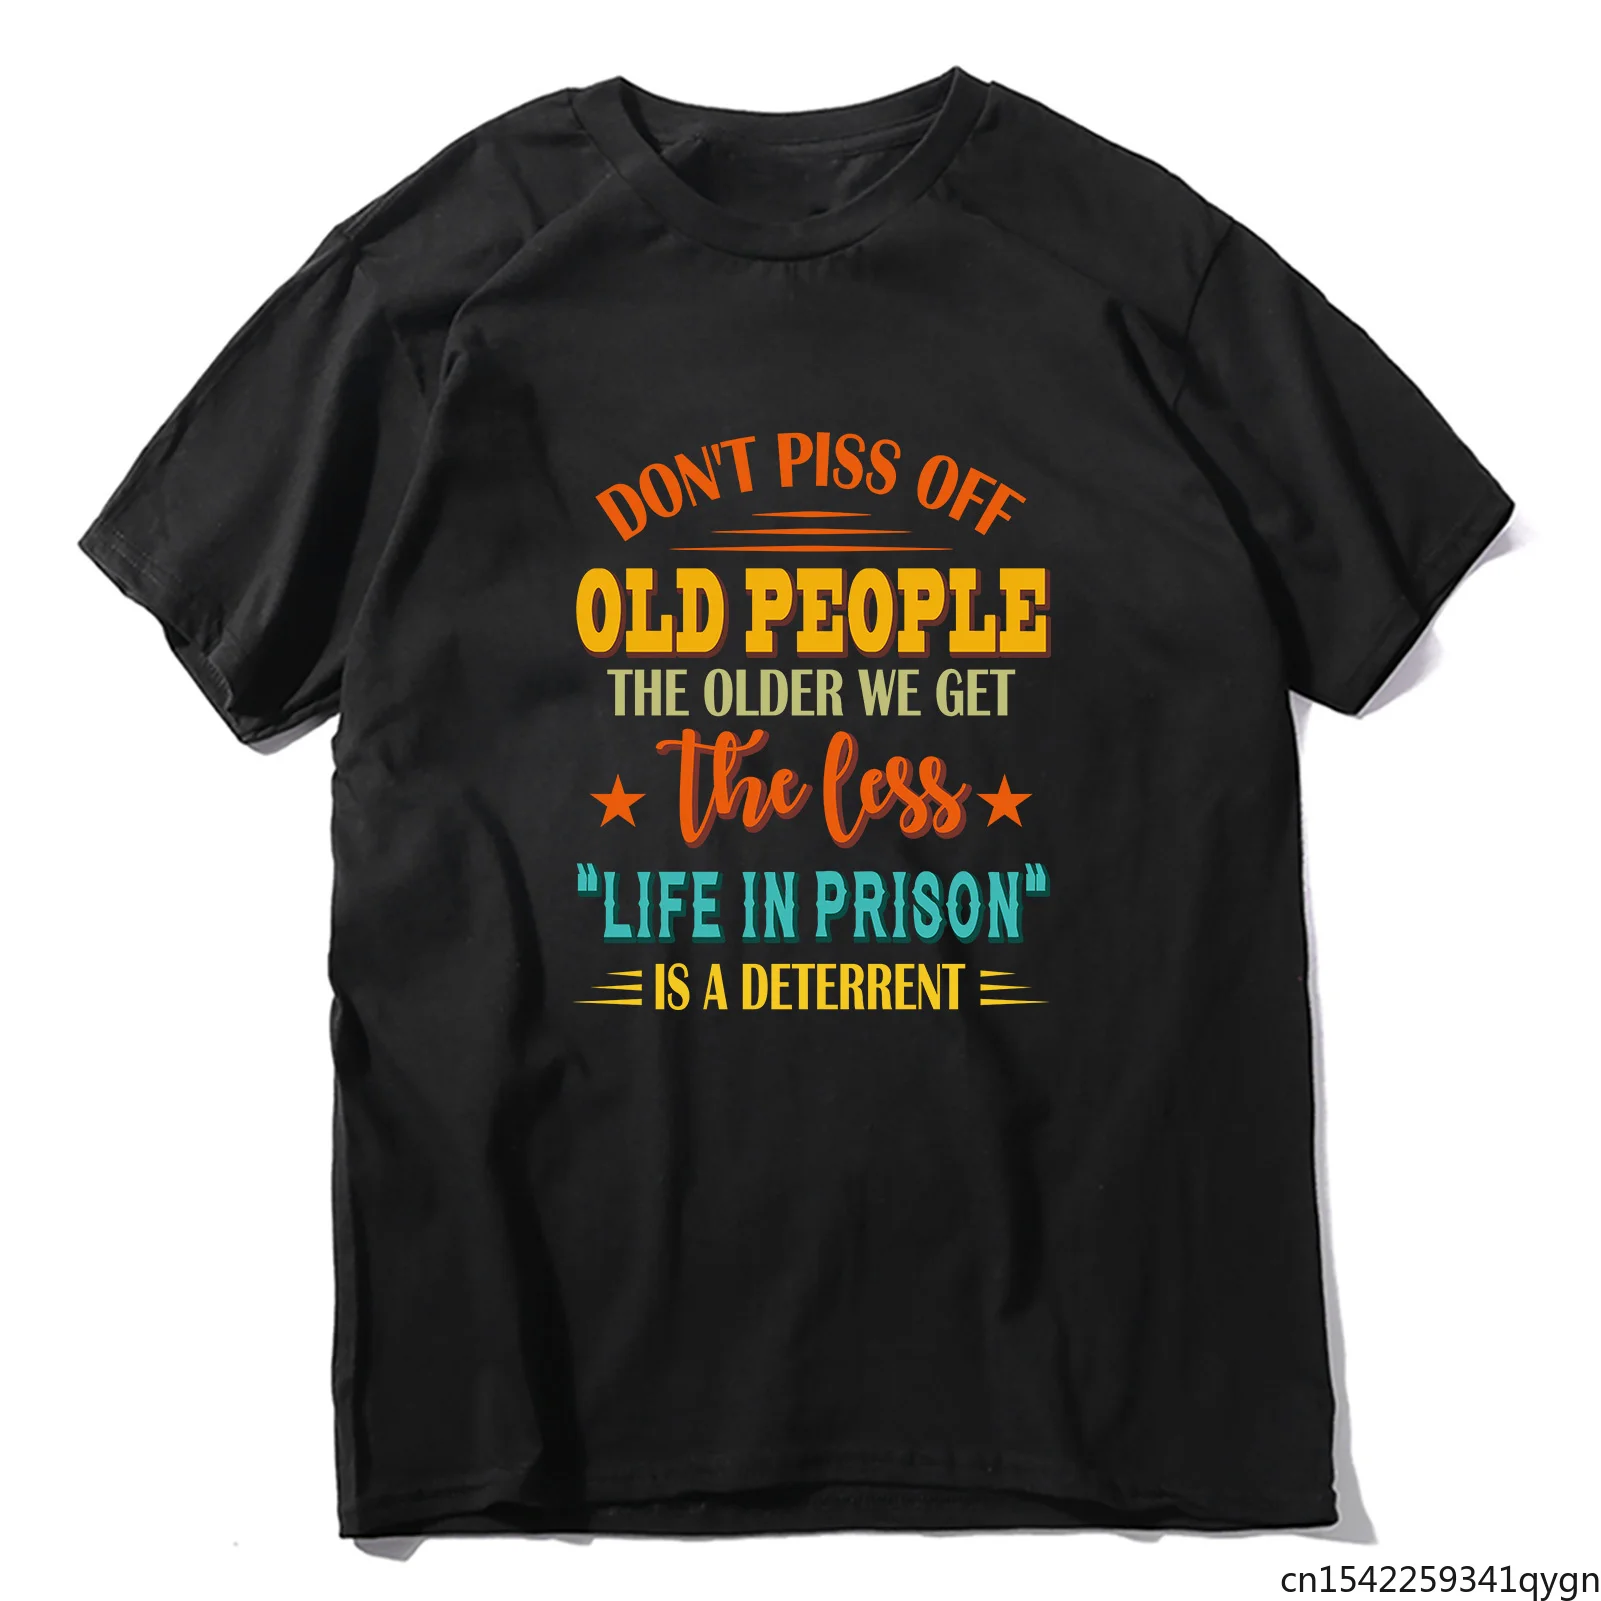 

Piss Don't Off Old People The Older We Get The Less Life Unisex T-Shirt Funny Shirt Vintage Men's Shirt Short Sleeve Tops Tee